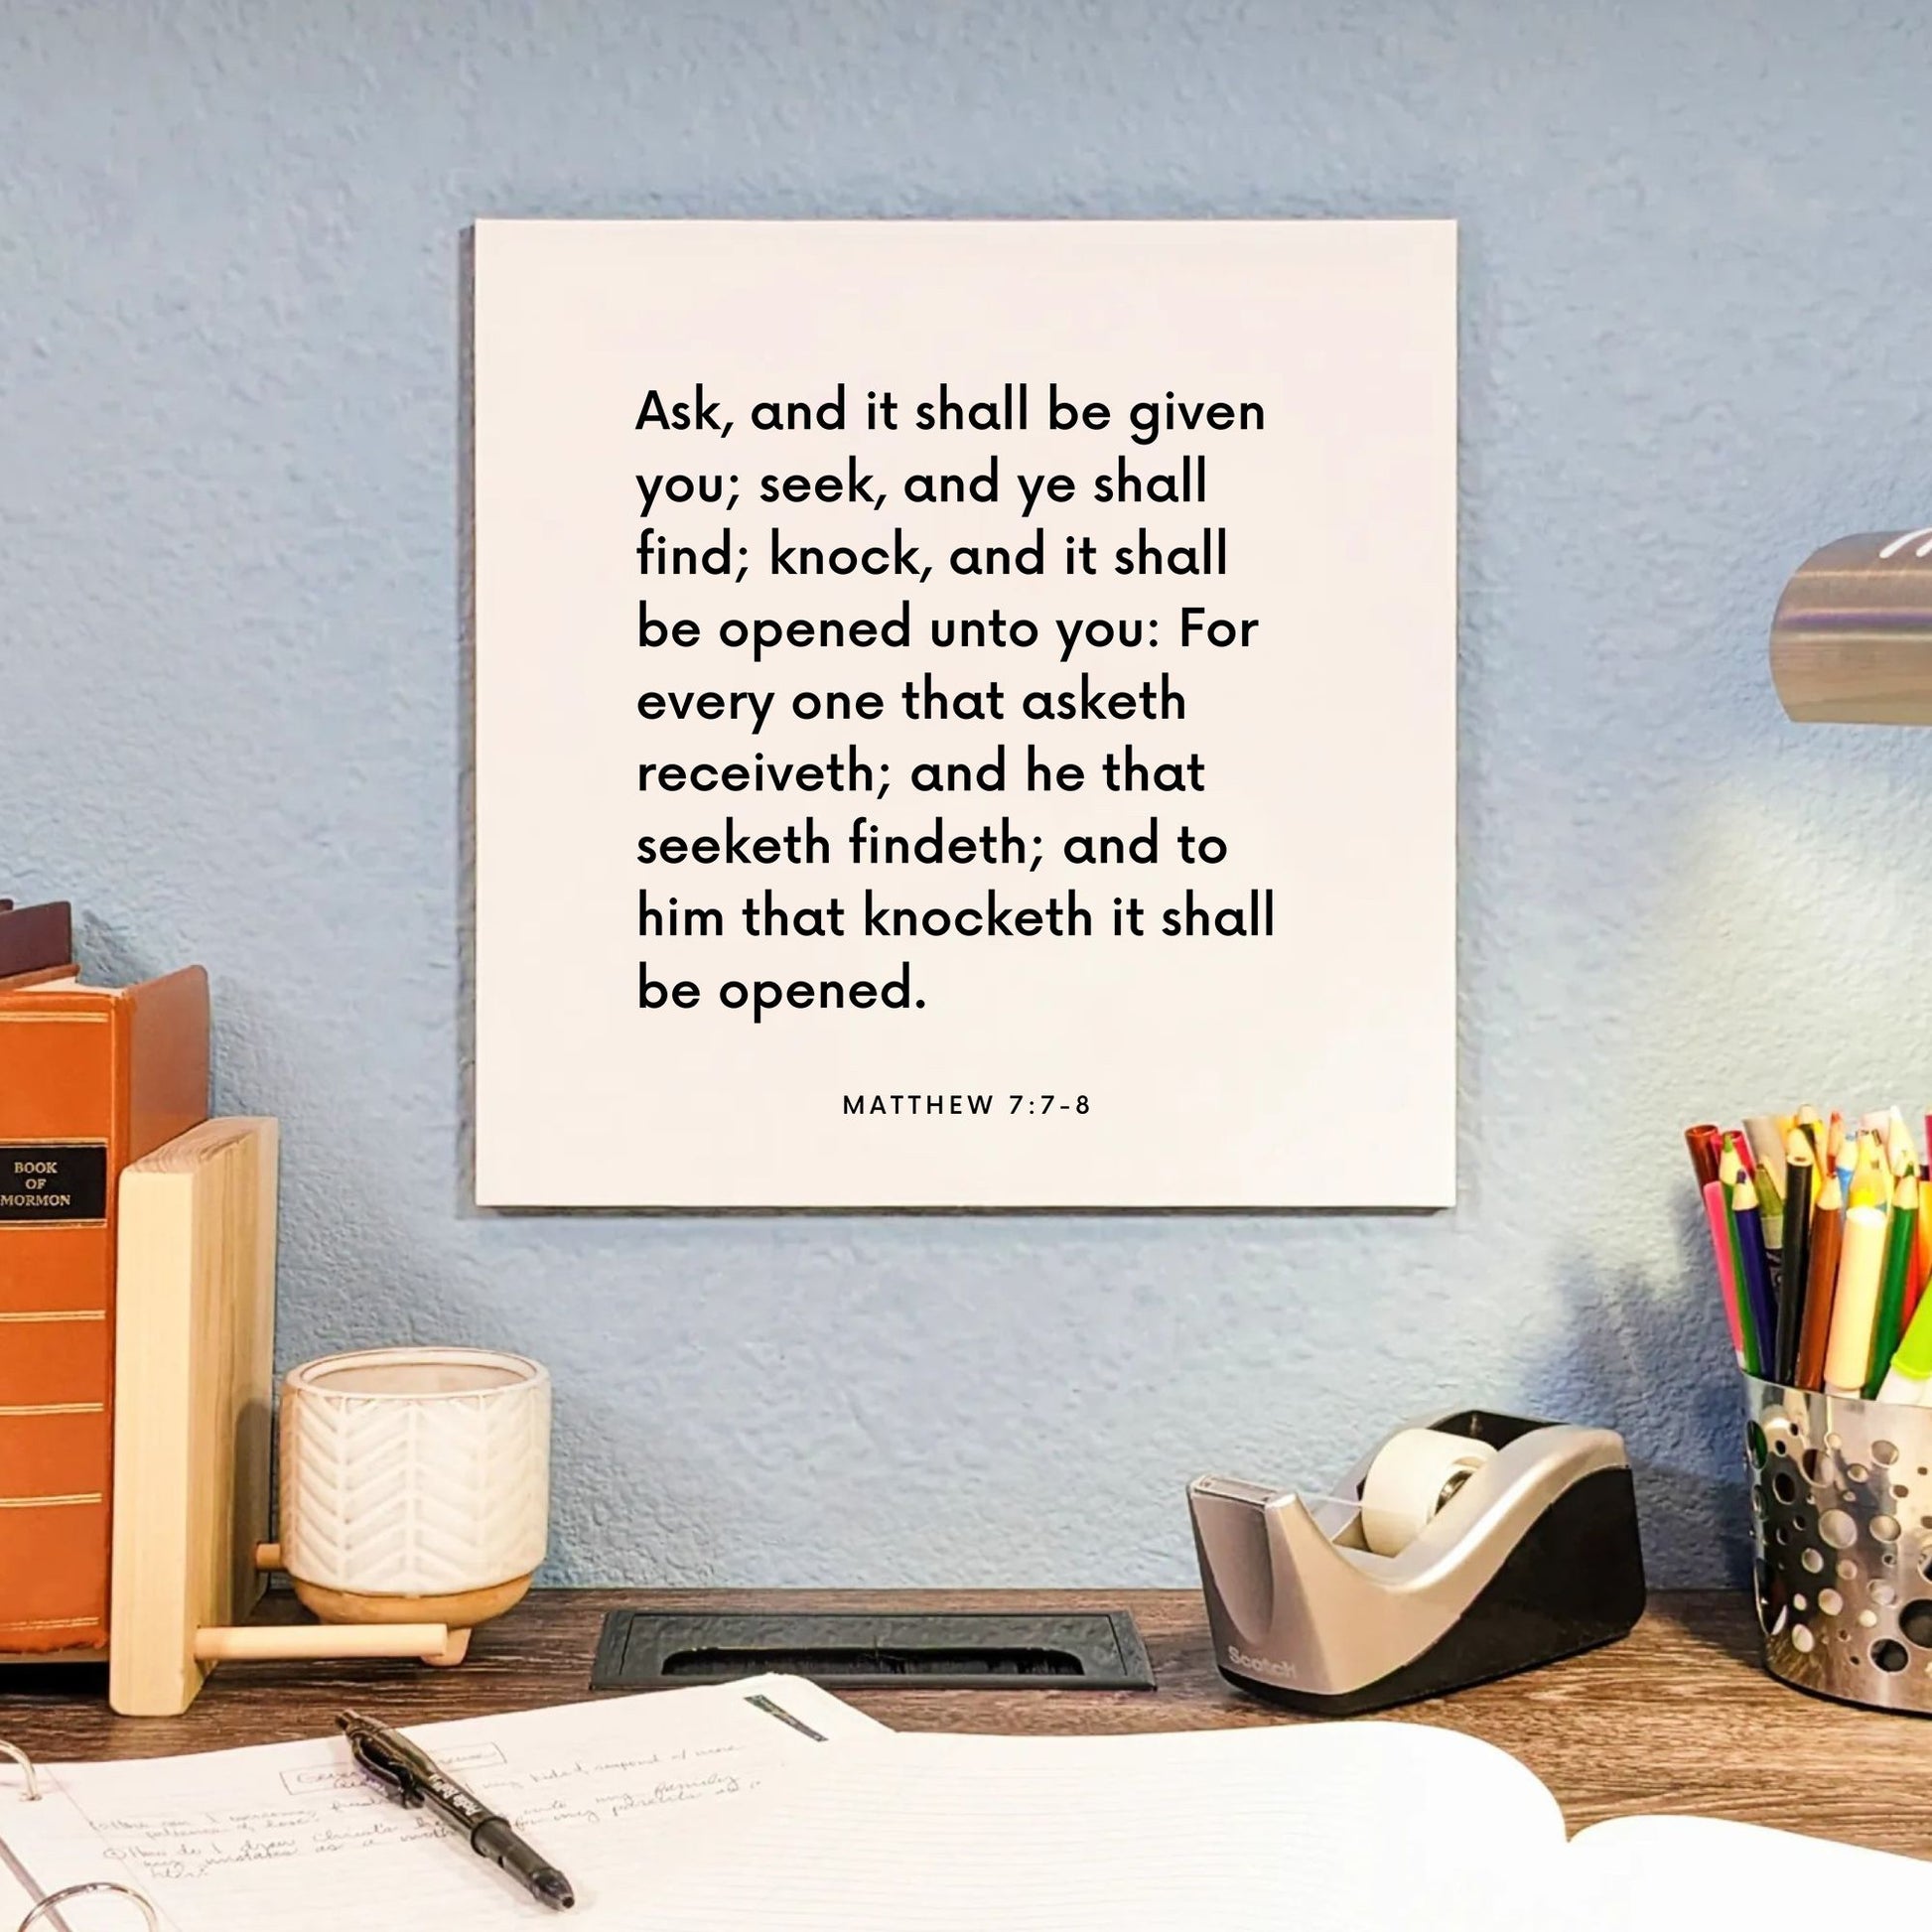 Desk mouting of the scripture tile for Matthew 7:7-8 - "Every one that asketh receiveth; and he that seeketh findeth"